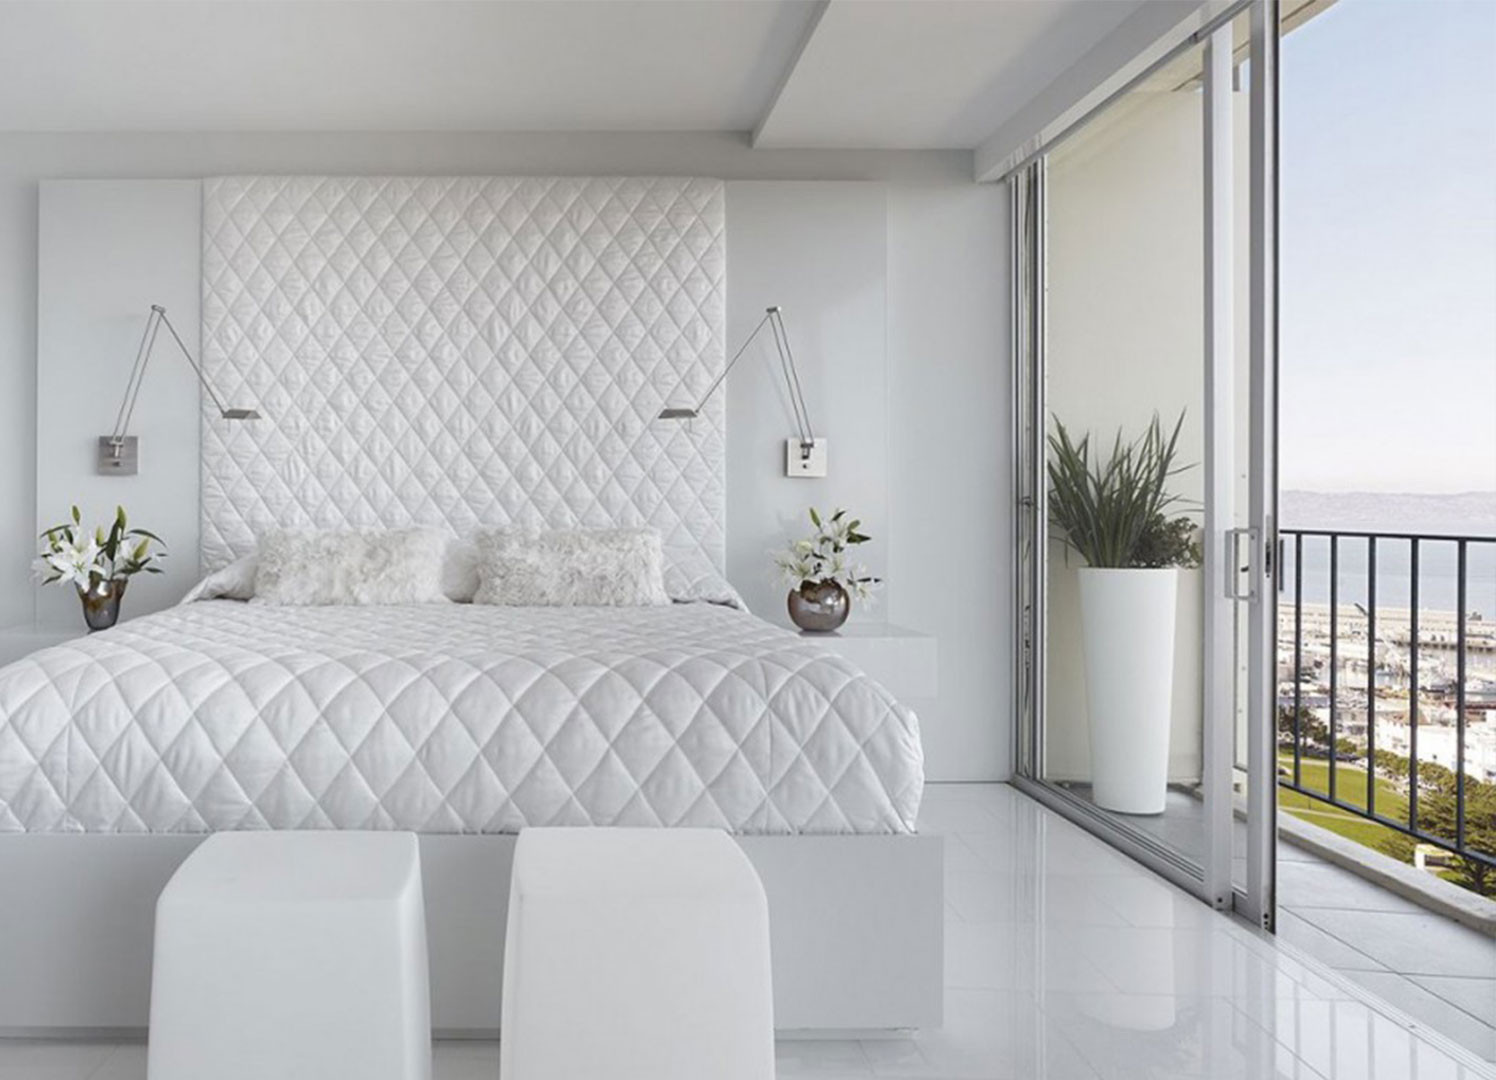 White Bedroom Decorating Ideas
 White Bedroom Design Ideas Collection for Your Home